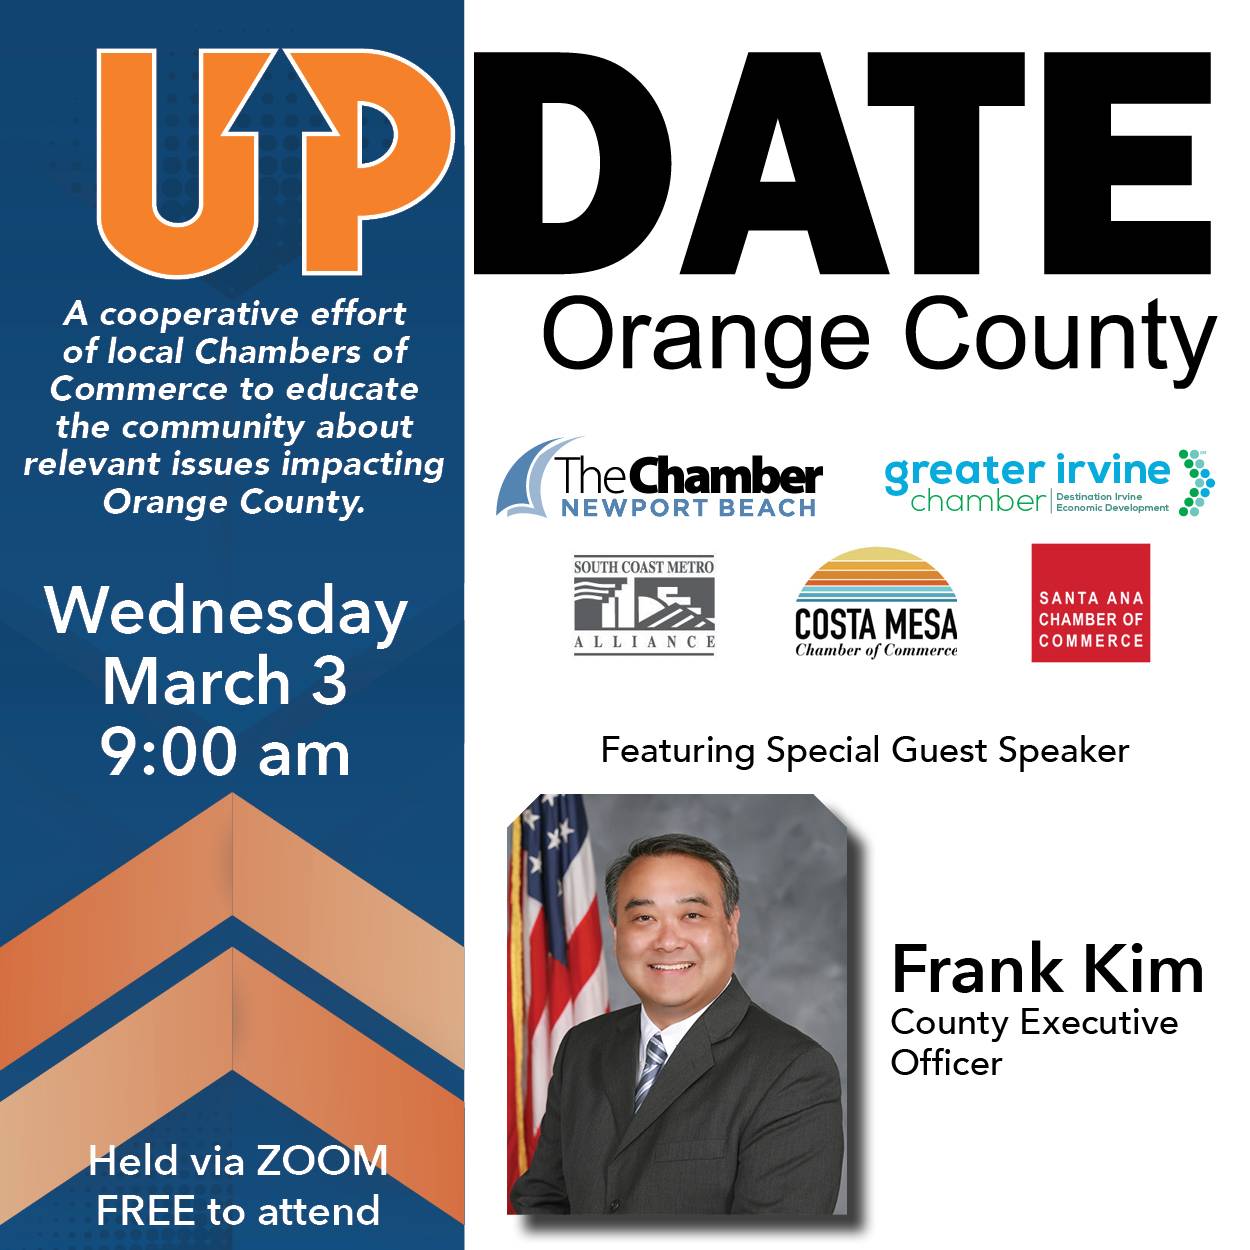 UPDATE Orange County featuring Orange County Executive Officer Frank Kim